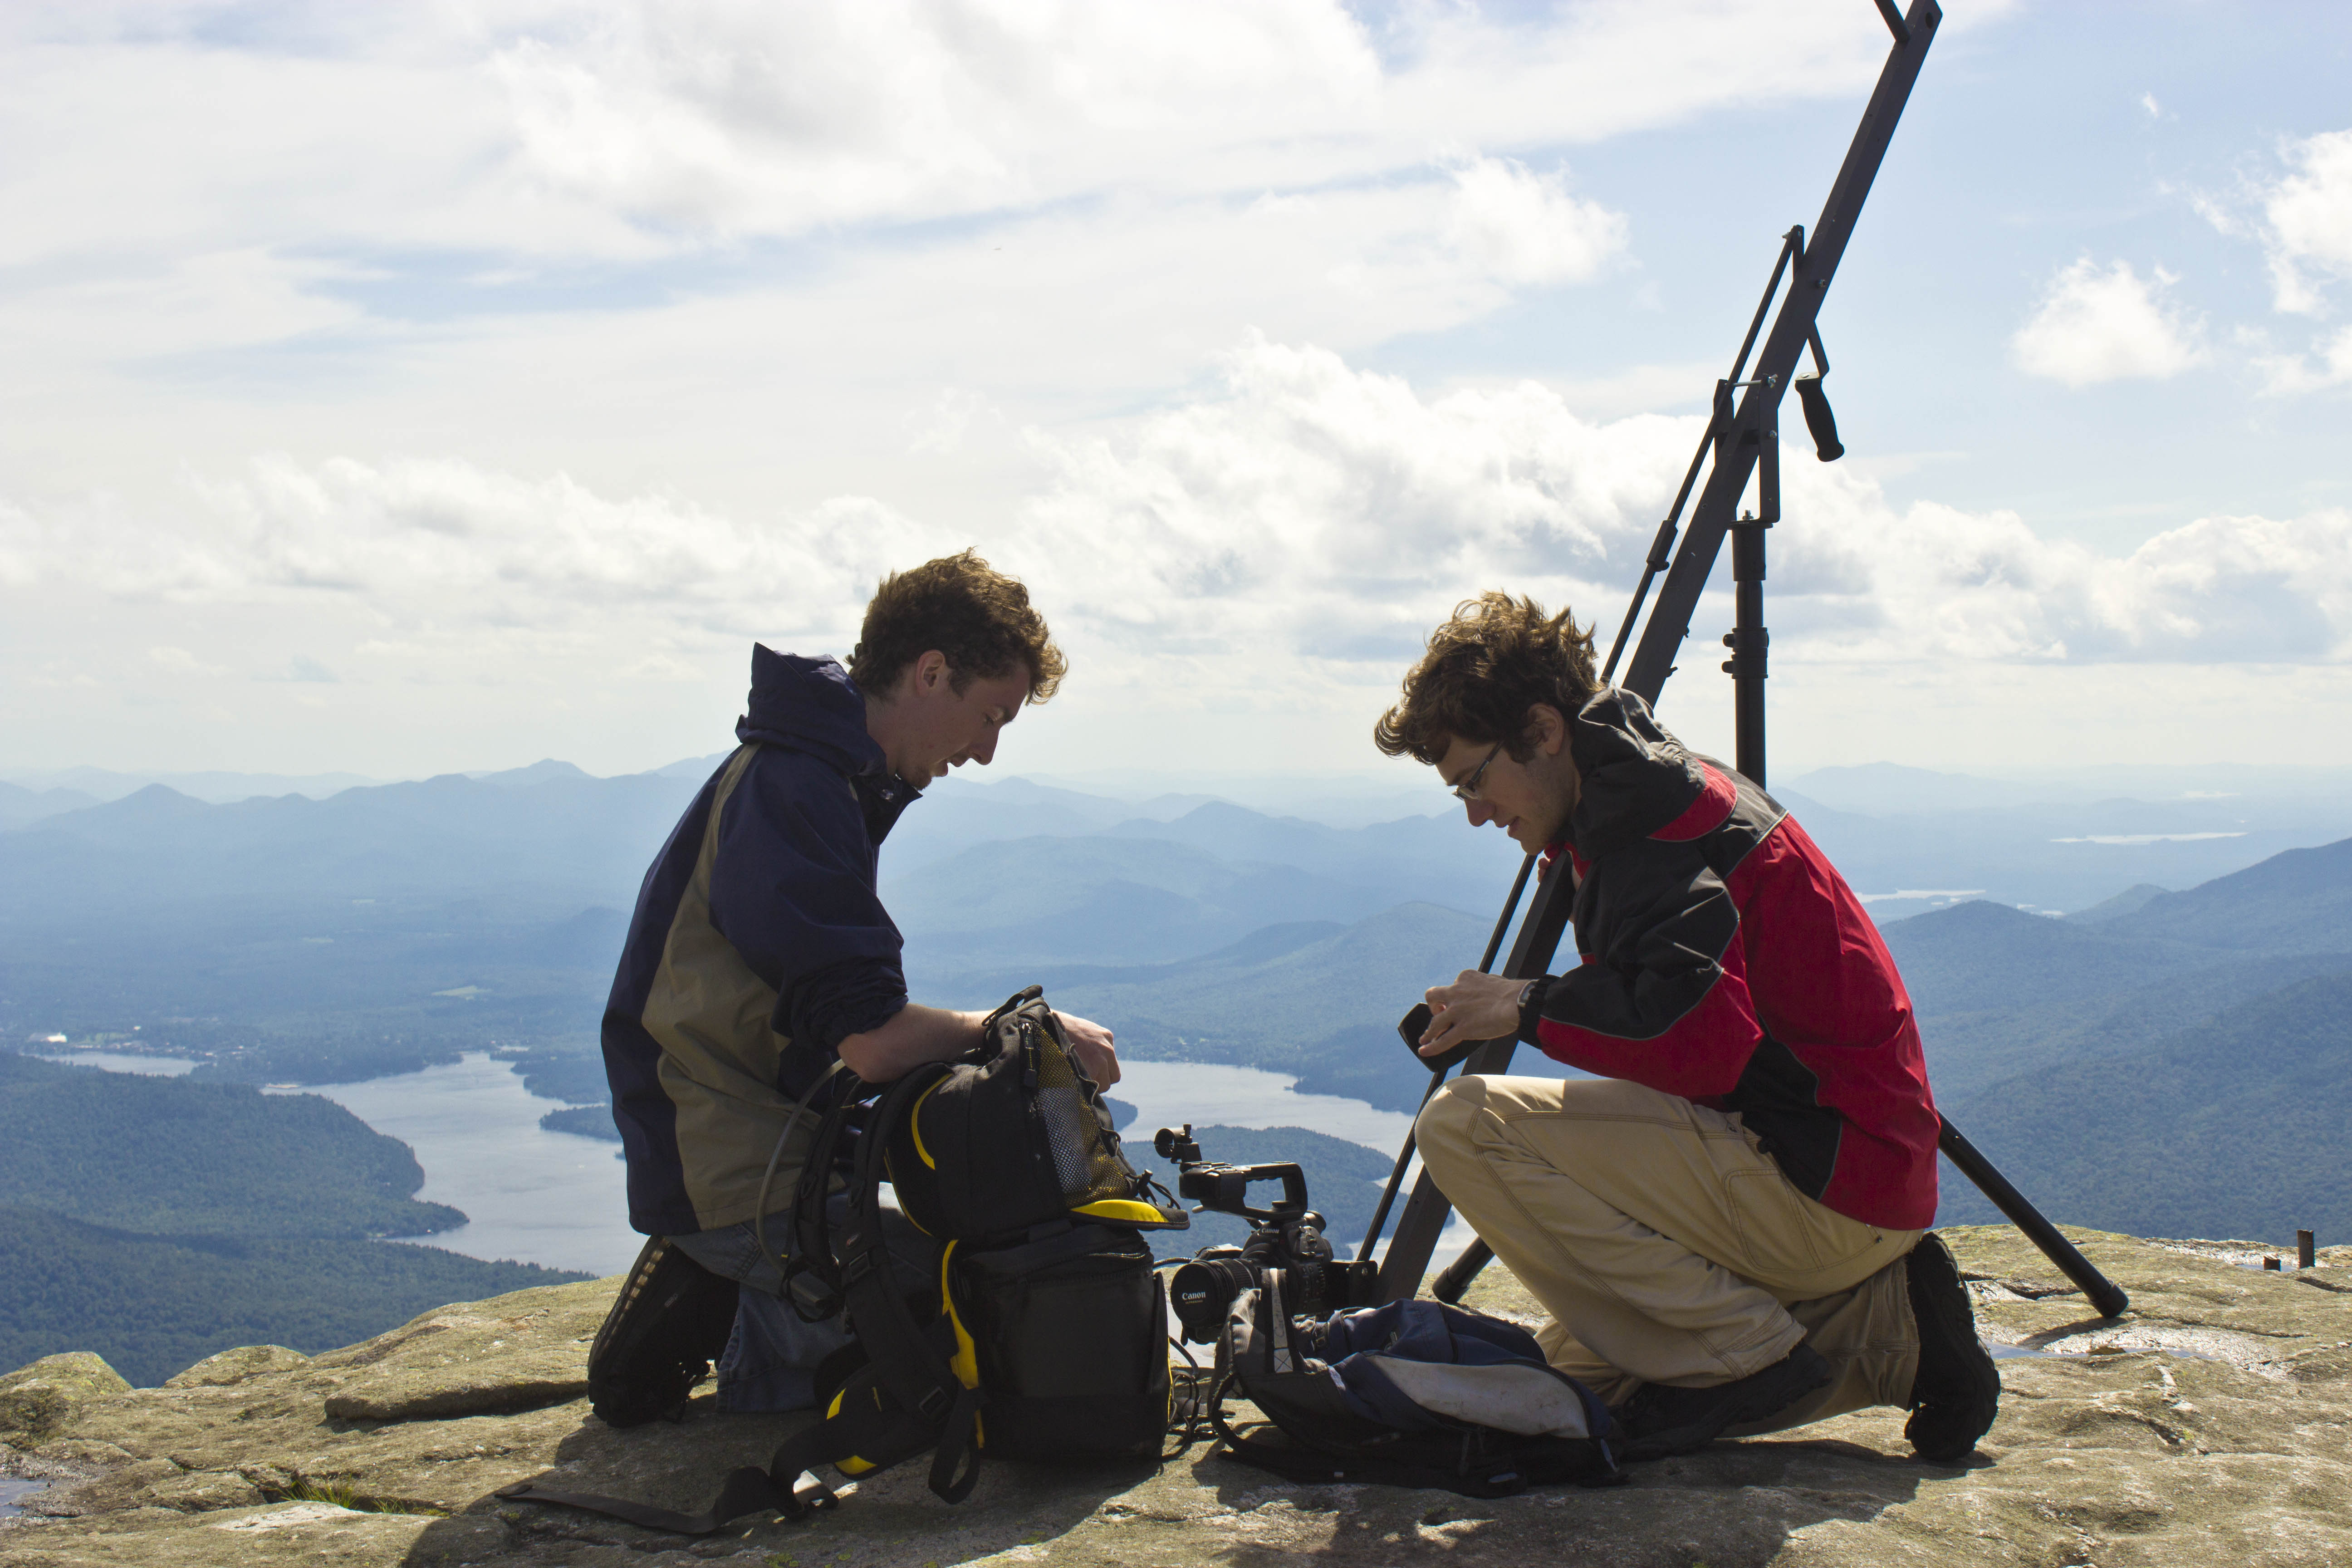 Blake Cortright [left] and Matthew Elton [right] set up a jib crane atop Whiteface Mountain in upstate NY's Adirondack park to capture footage for 